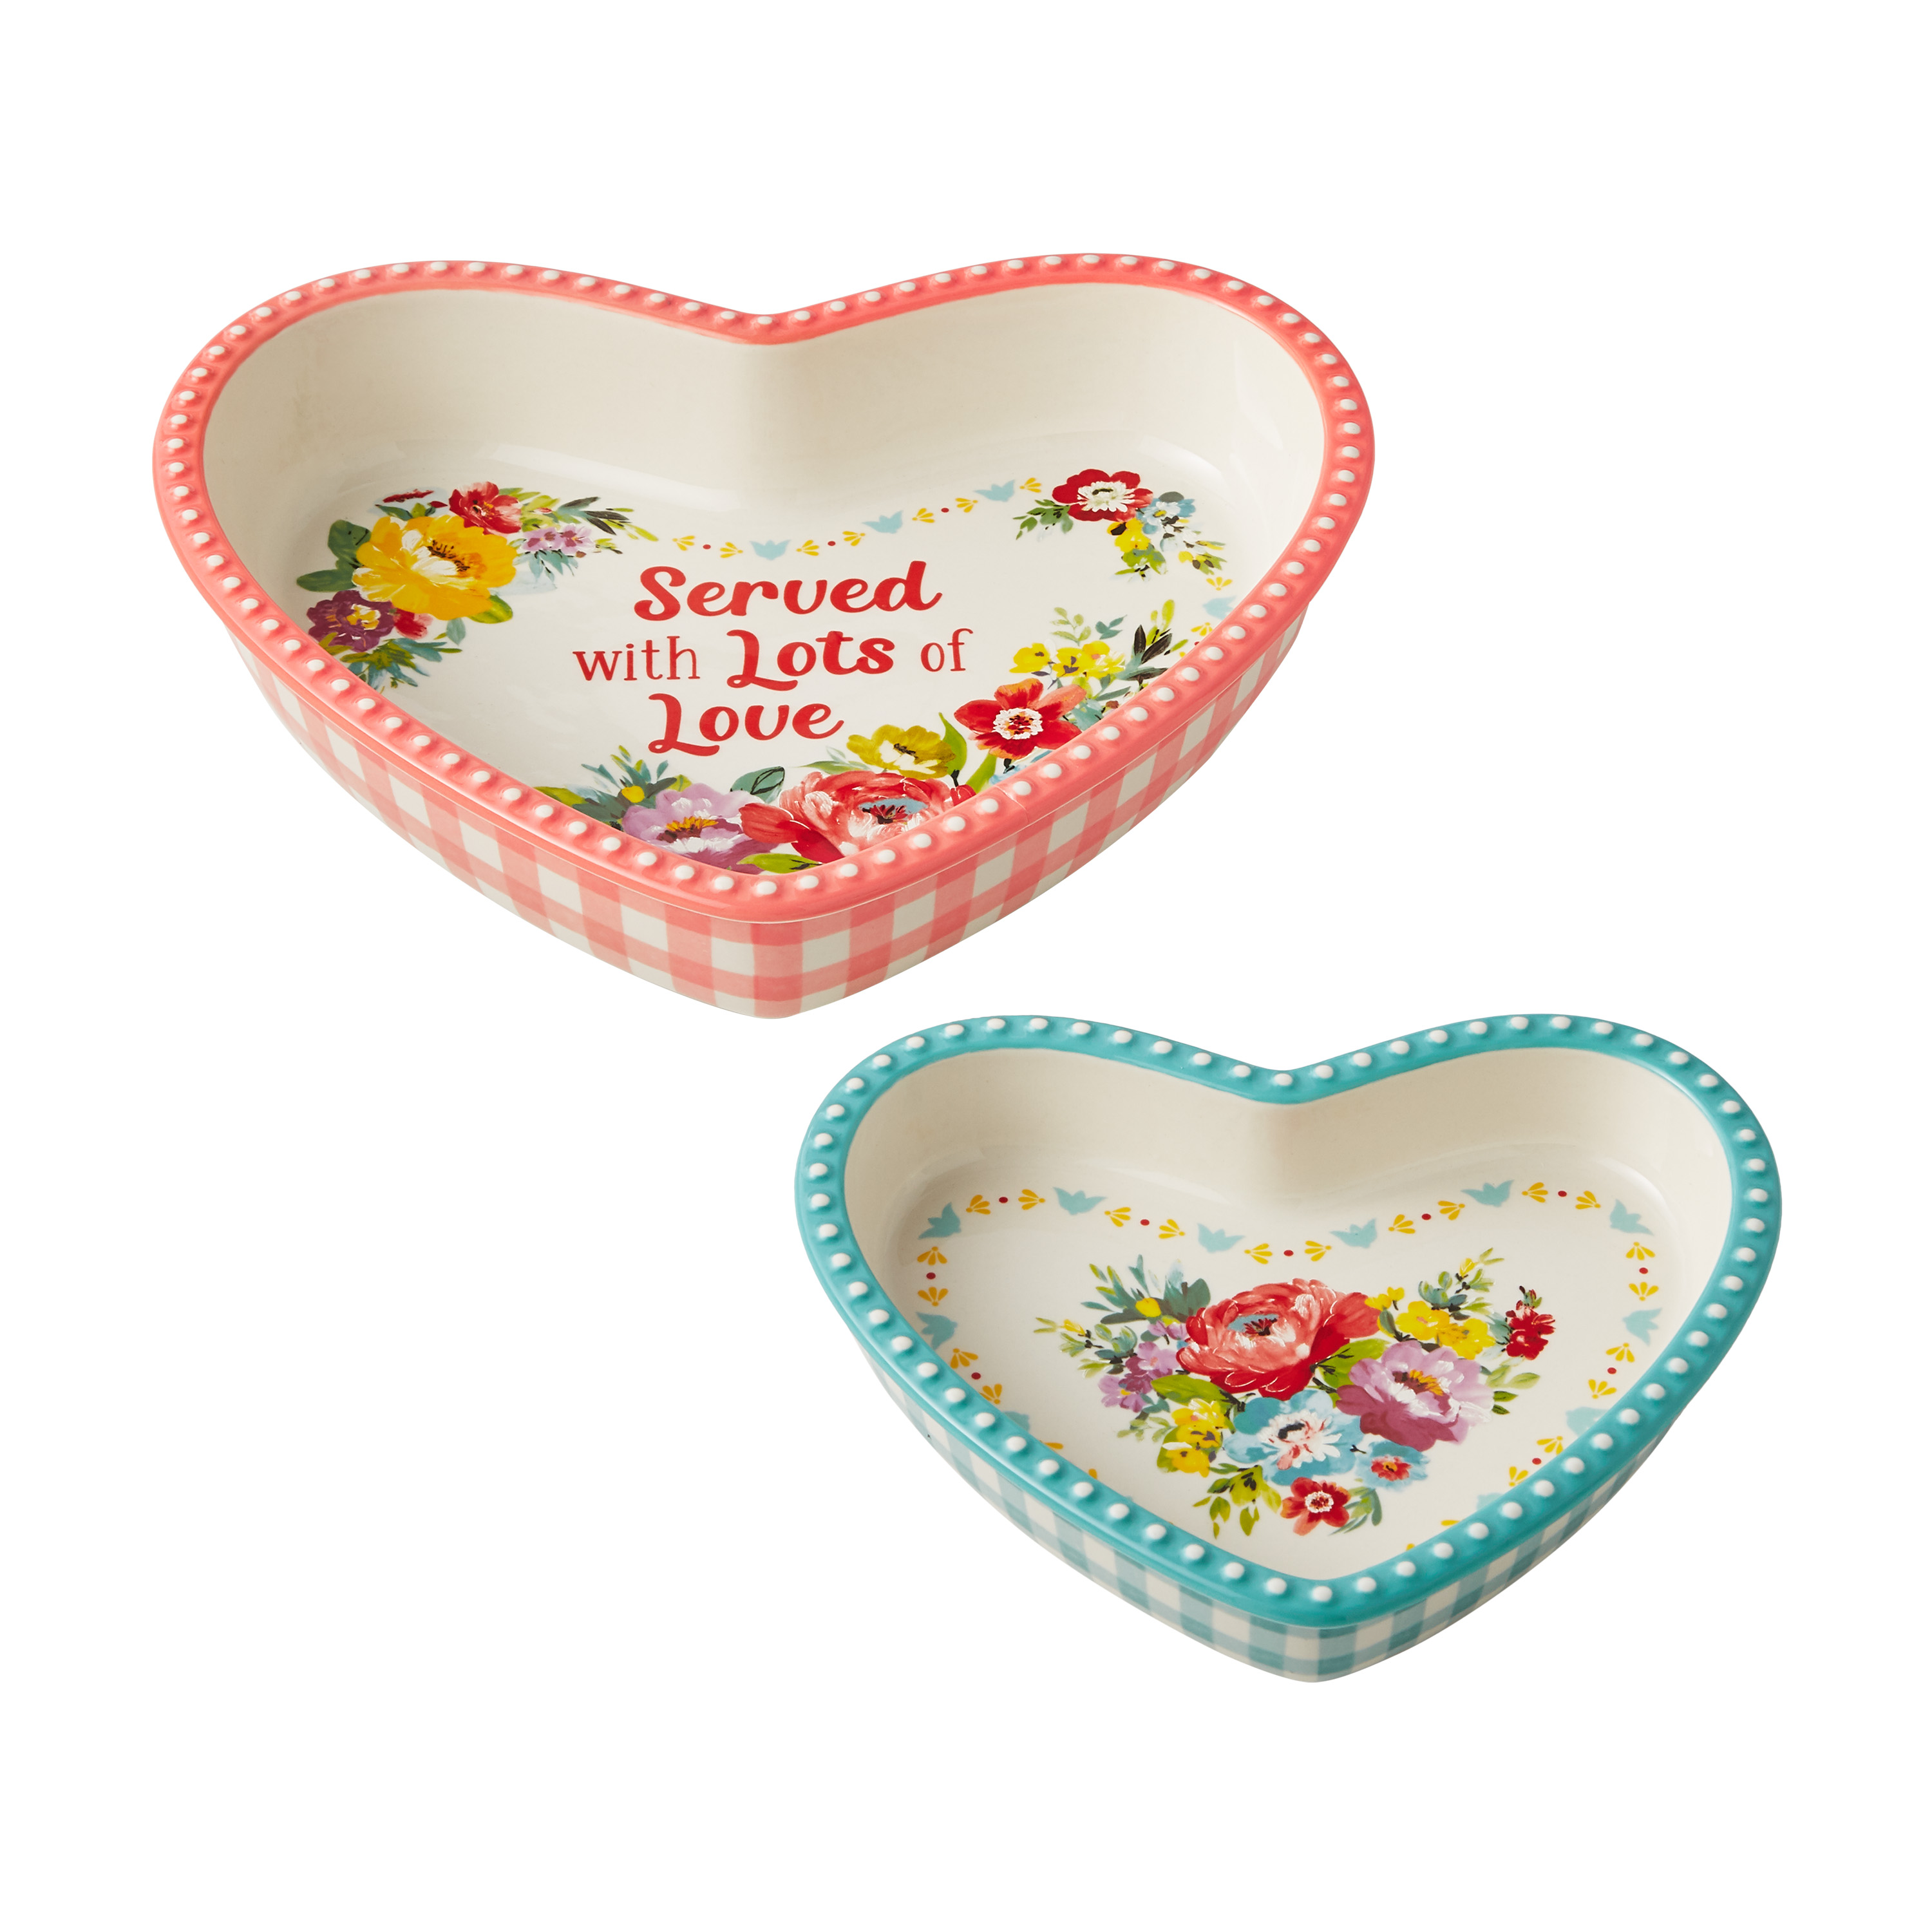 The Pioneer Woman 2-Piece Heart Shaped Ceramic Dish - image 1 of 5